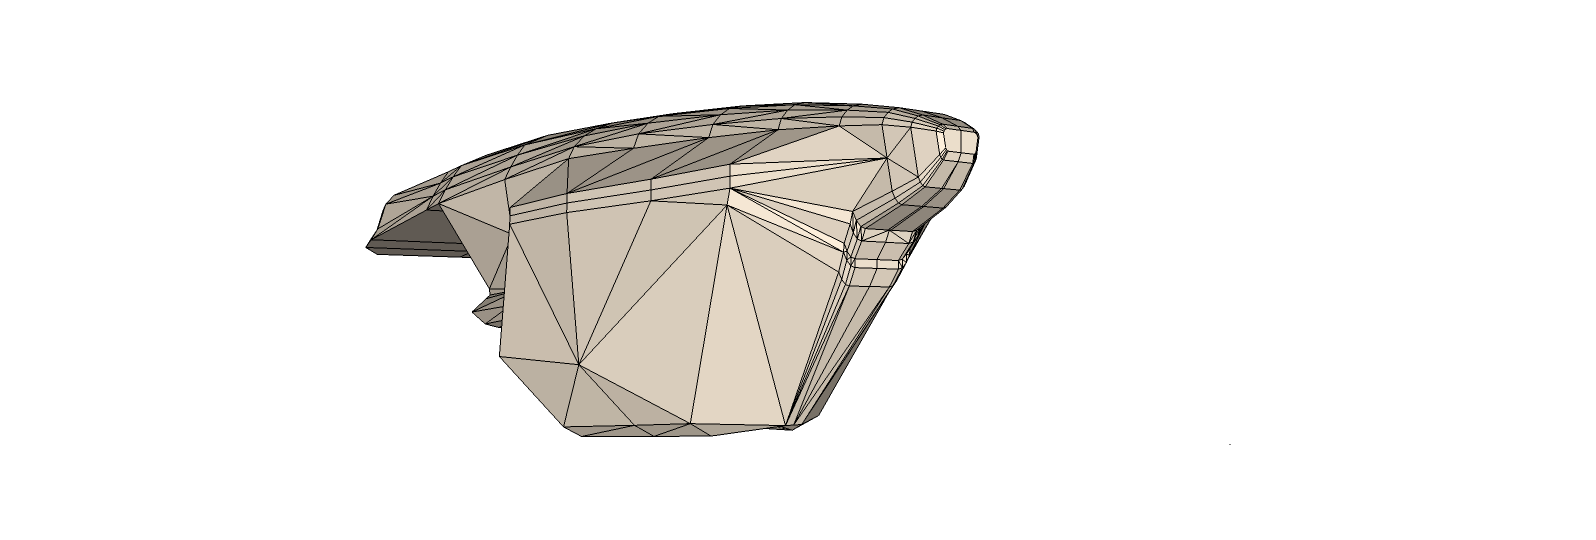 LOWERPOLY_STARSHIP_CONCEPT_SEPERATION.png